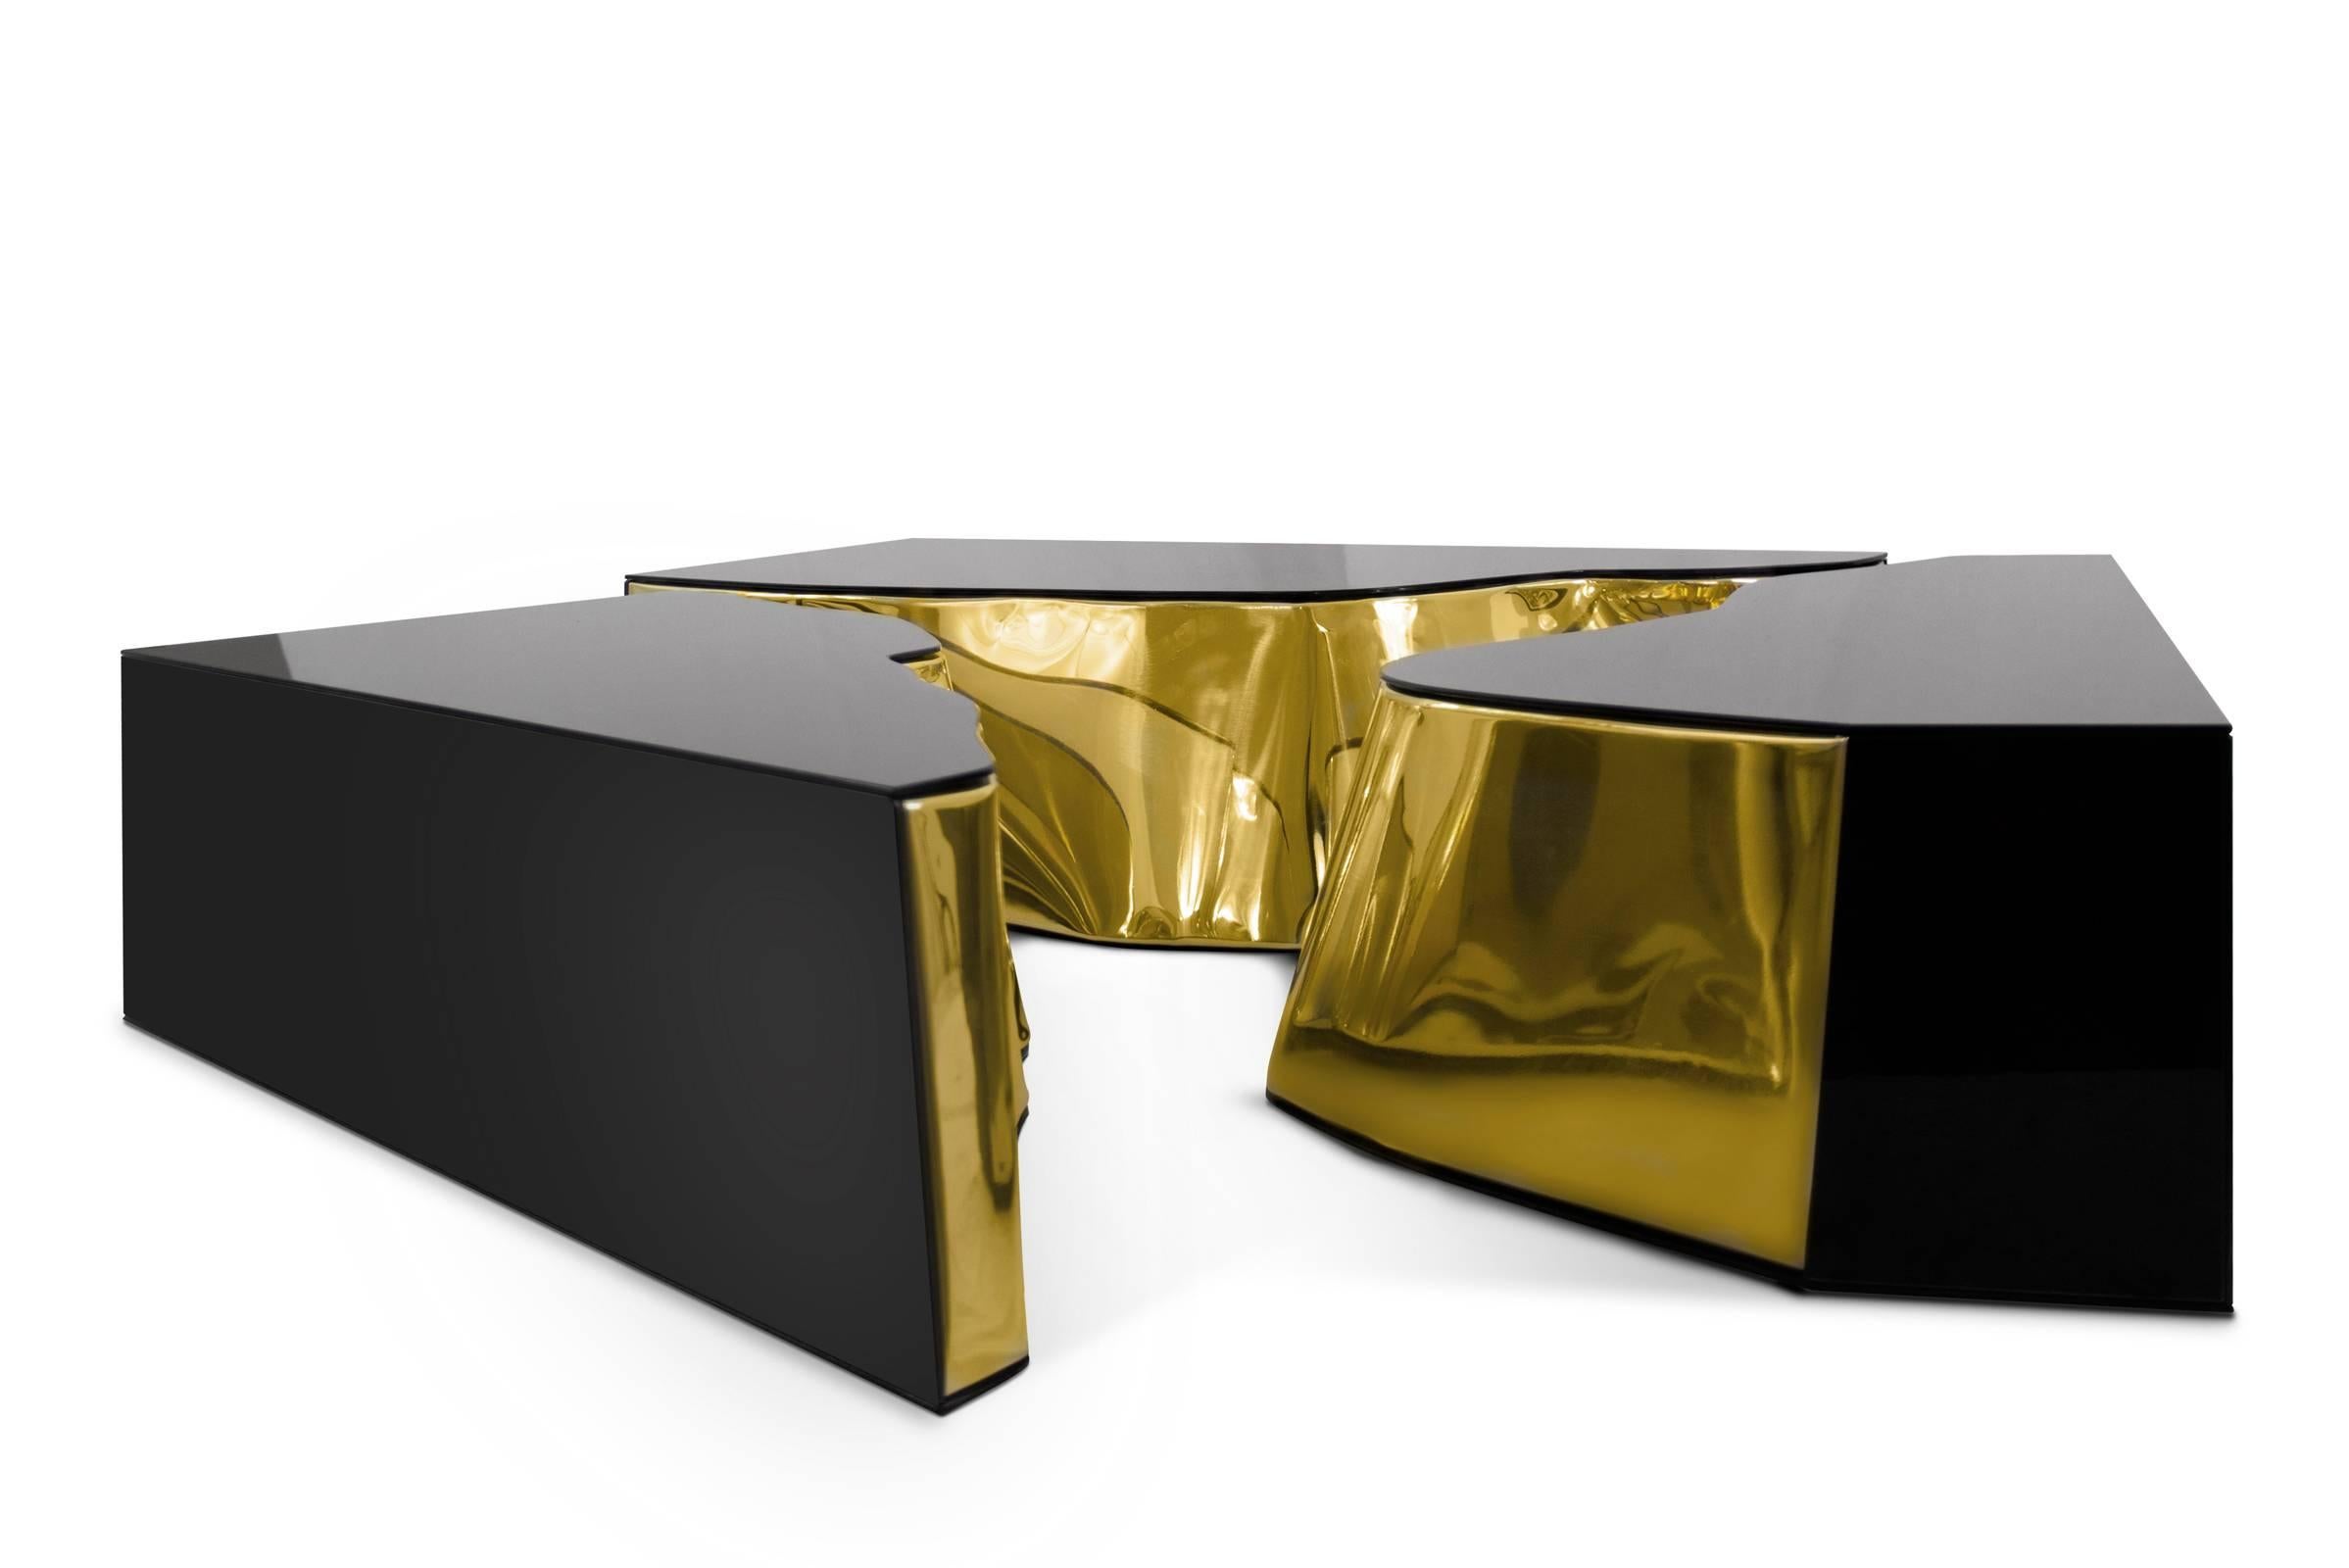 Coffee table Paradise features a mahogany structure 
with its inside finished in polished brass, exterior 
finished in coated polished stainless steel.
Also available in black finish, poplar or walnut finish on request.
